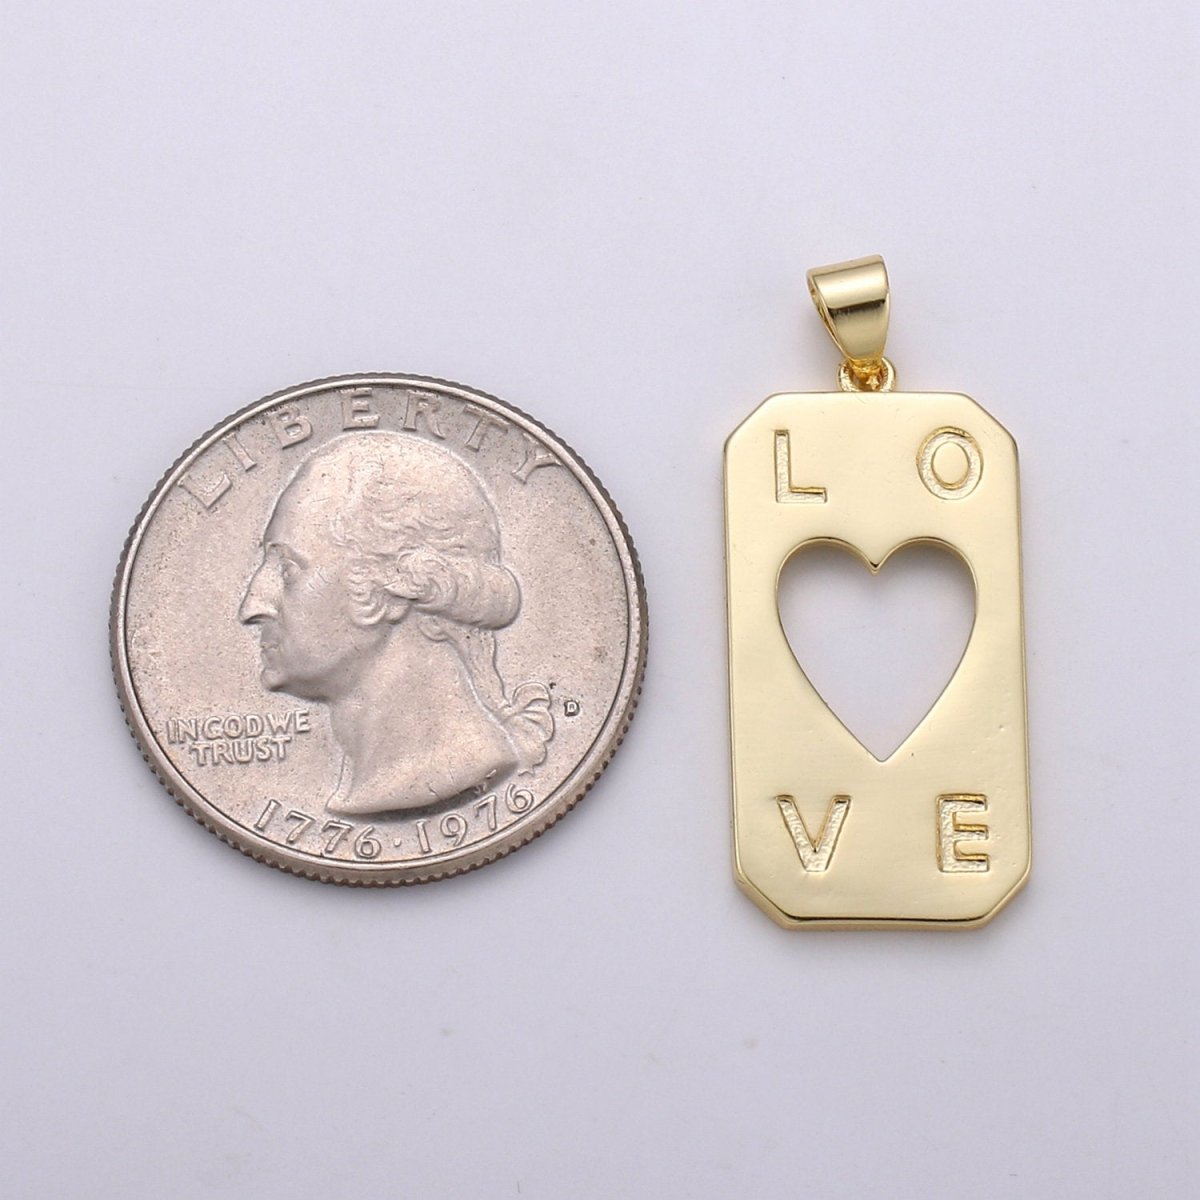 14K Gold Filled Charm Hollow out Heart Pendant LOVE Words Charm Tag Jewelry for Necklace Bracelet Earring Component Supply J-126 - DLUXCA